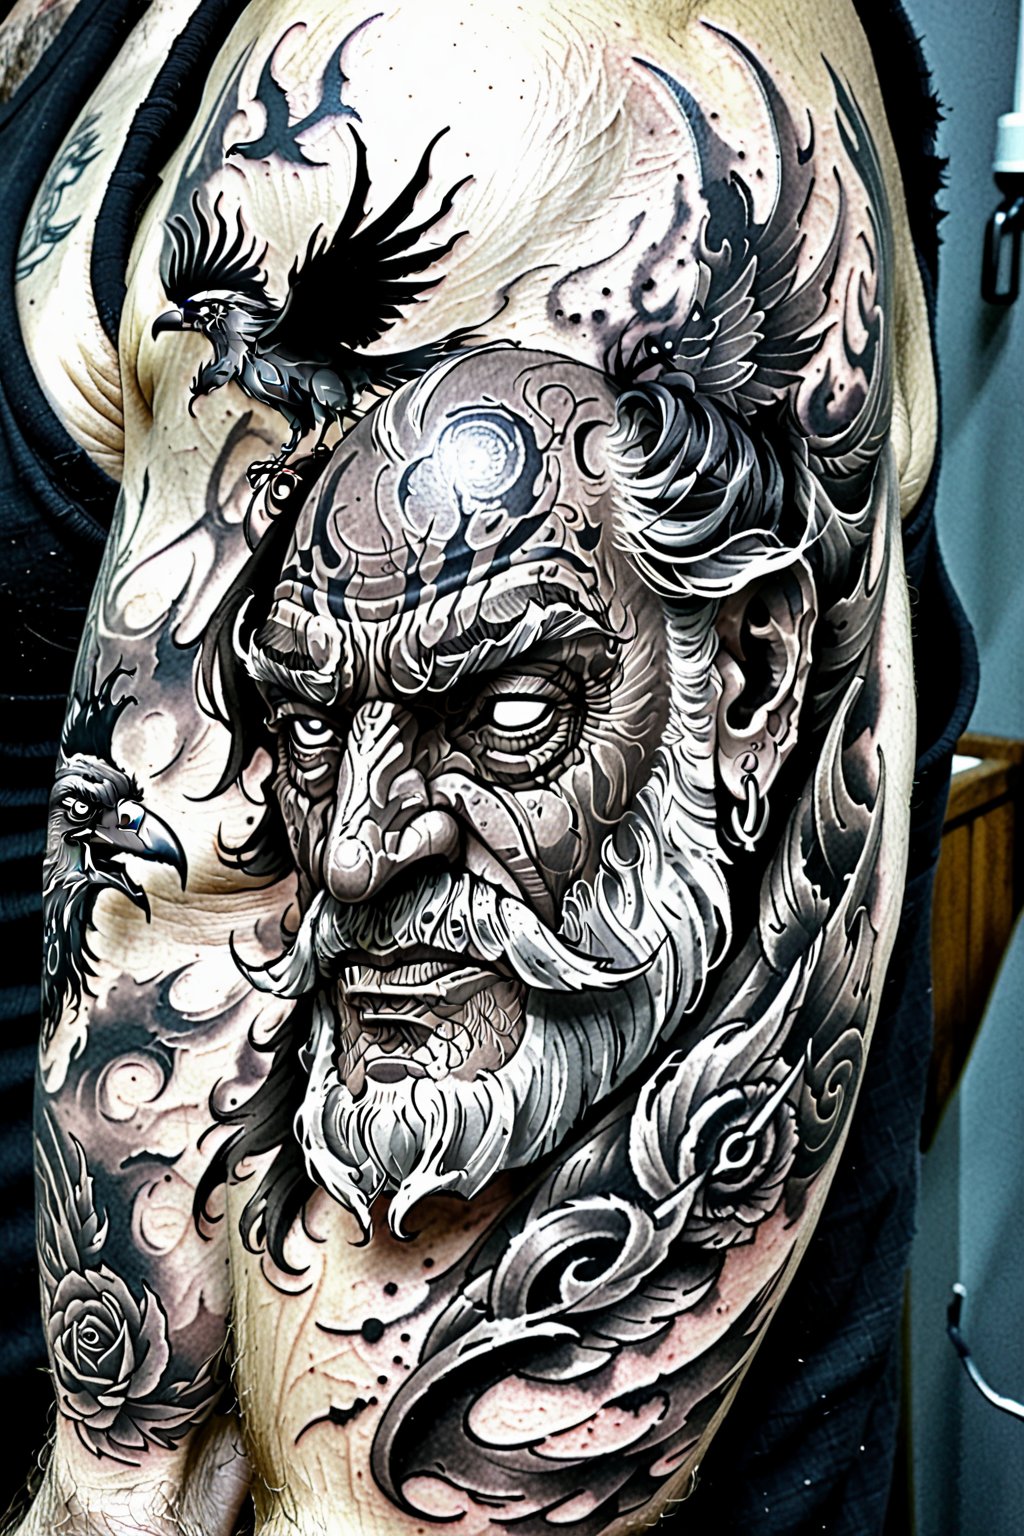 xlinex, line art tattoo of Odin with a raven on his shoulder, black white and charcoal color palette, portrait of a bearded old blind man with an eye patch, weathered wrinkled skin, dark messy hair, raven on his shoulder,1y0n